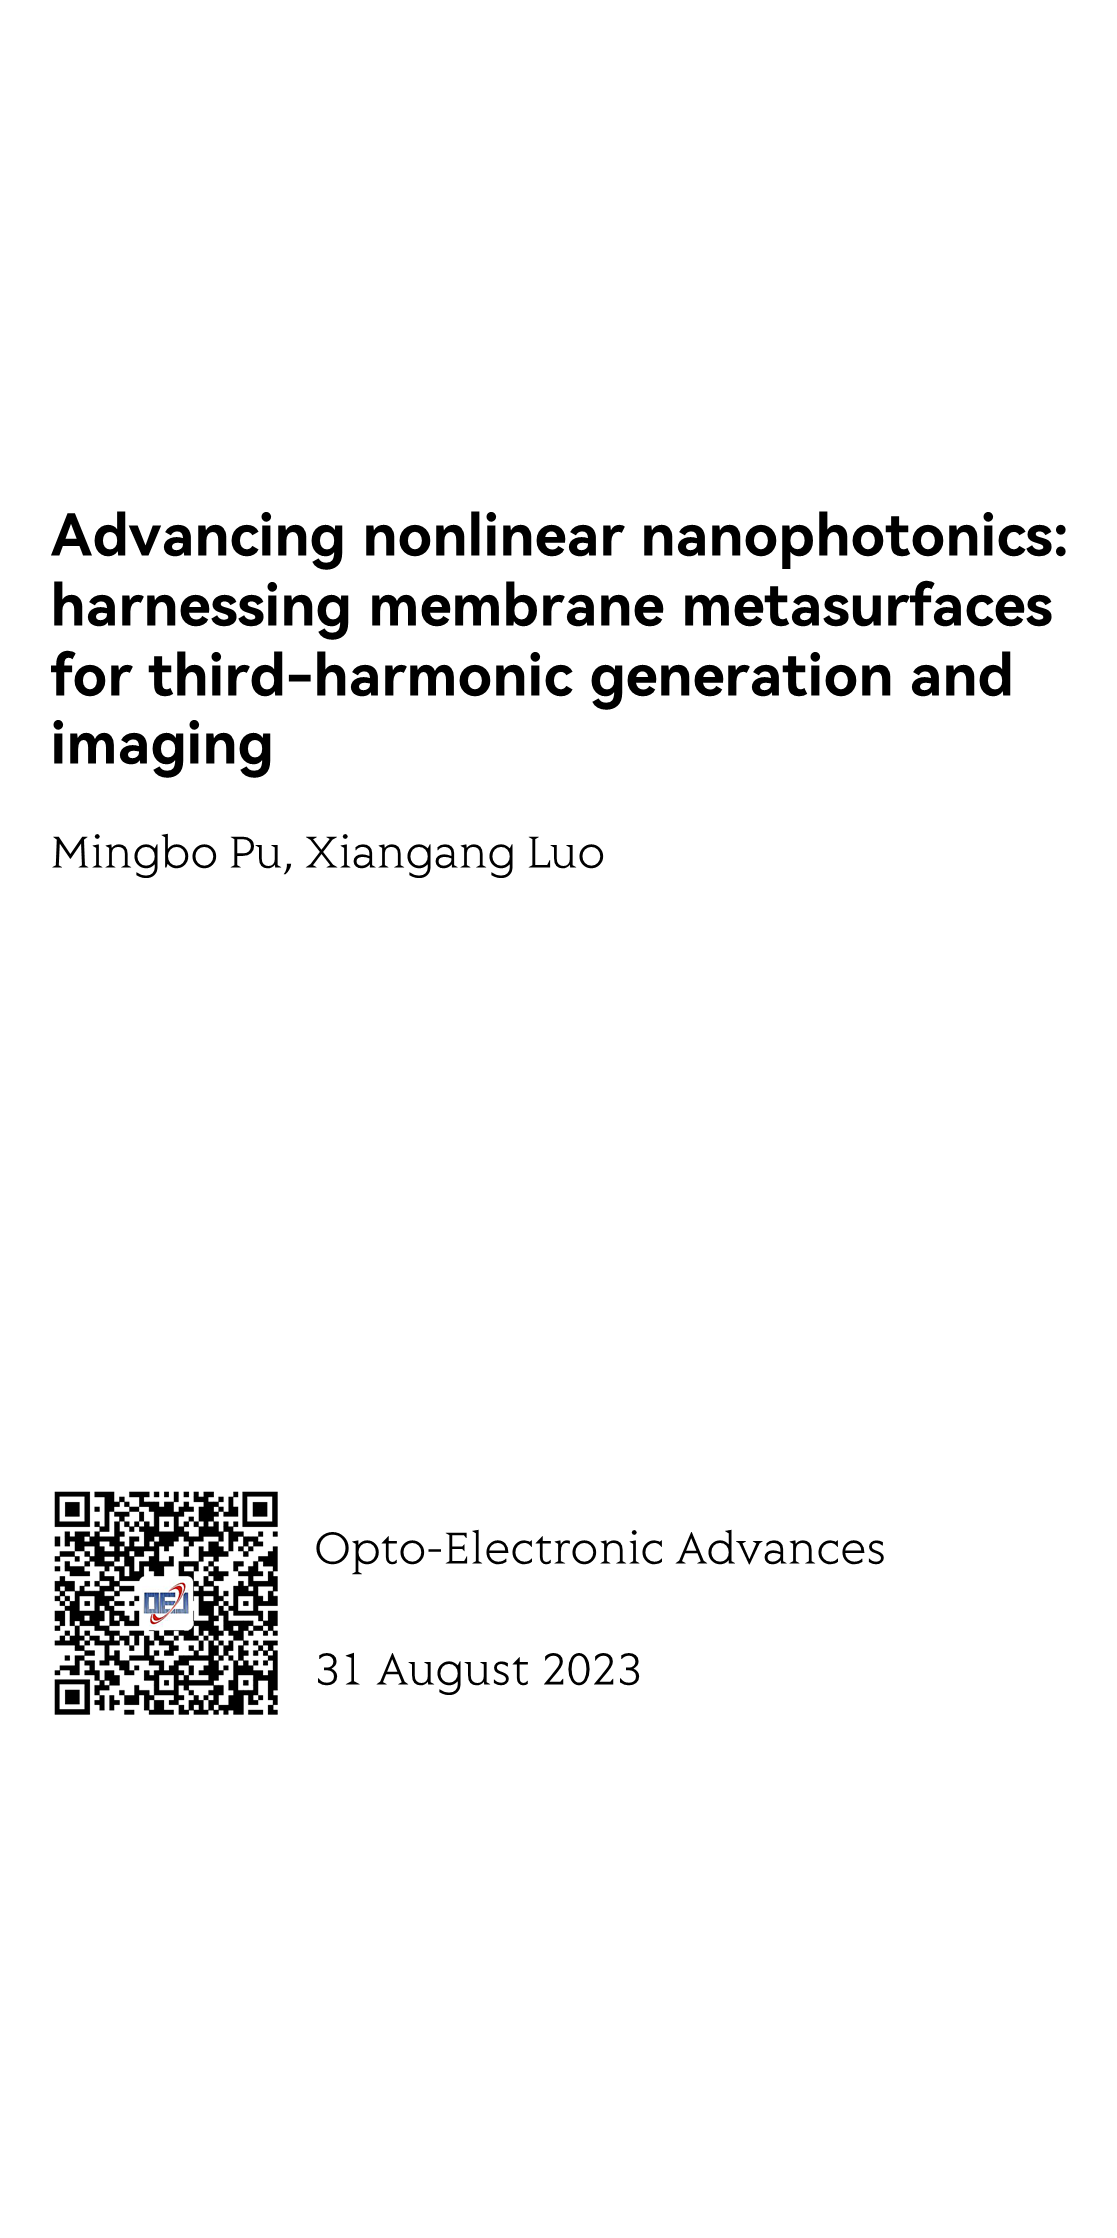 Advancing nonlinear nanophotonics: harnessing membrane metasurfaces for third-harmonic generation and imaging_1